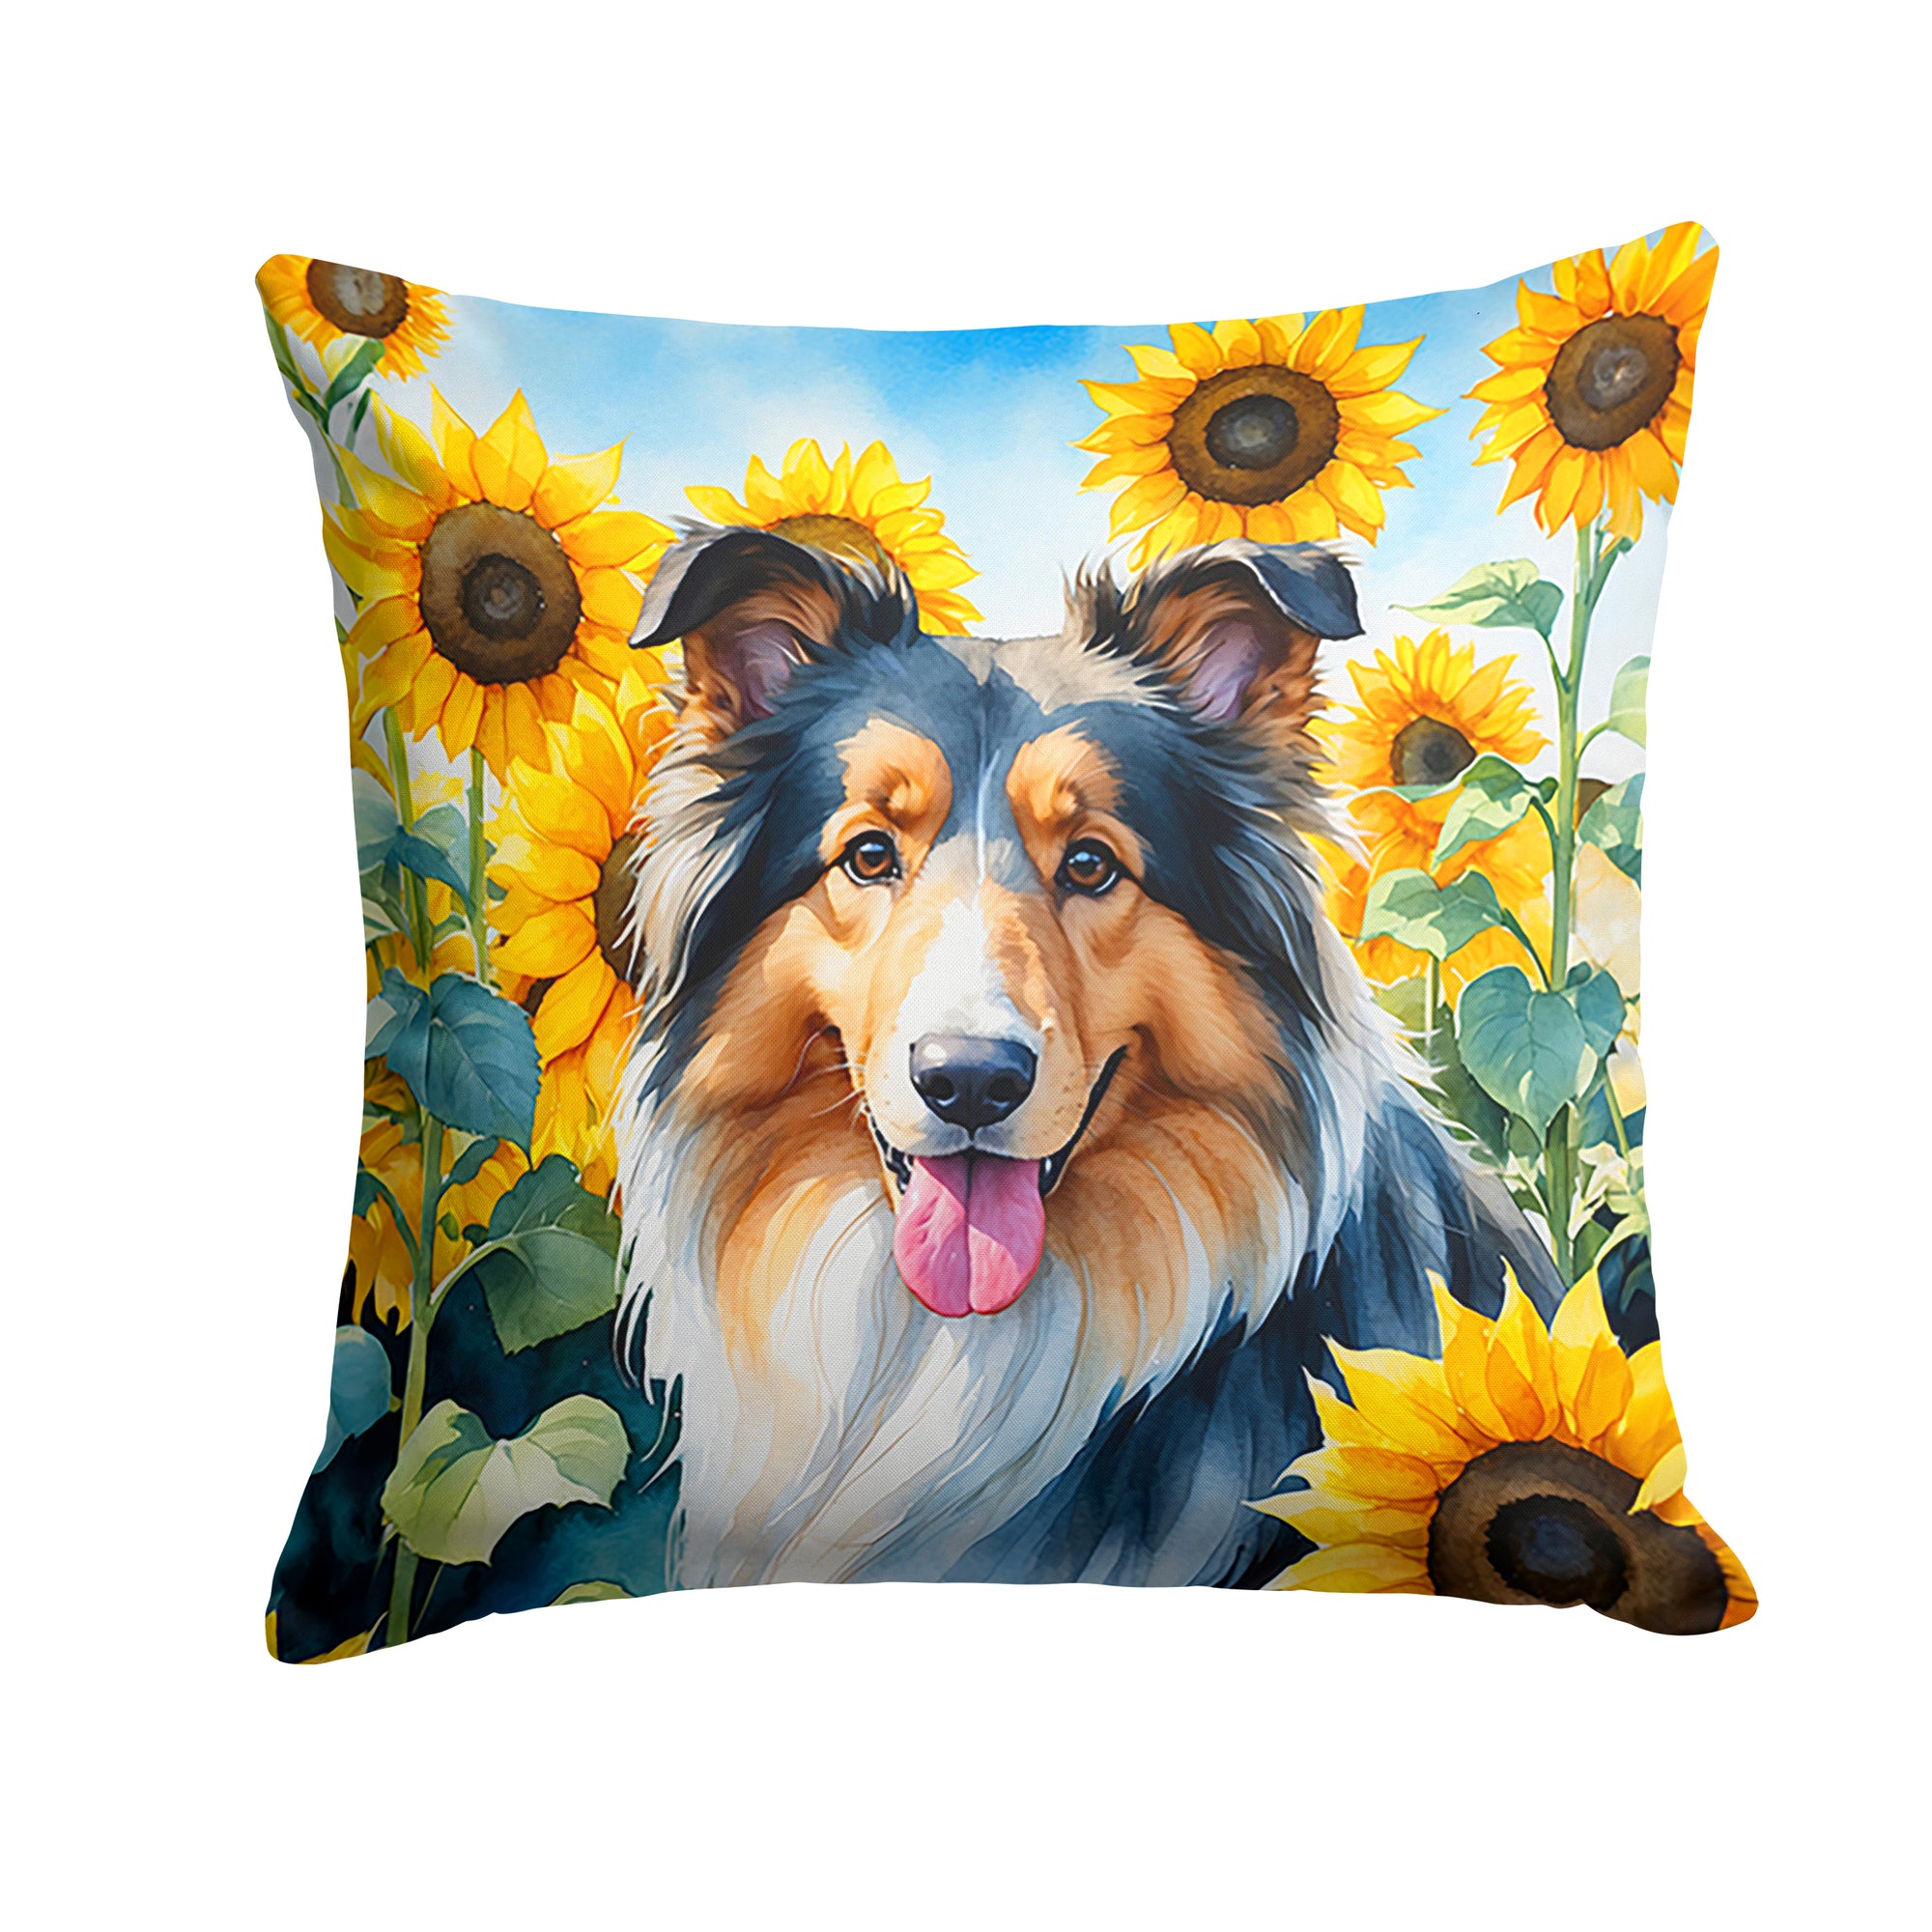 Buy this Collie in Sunflowers Throw Pillow